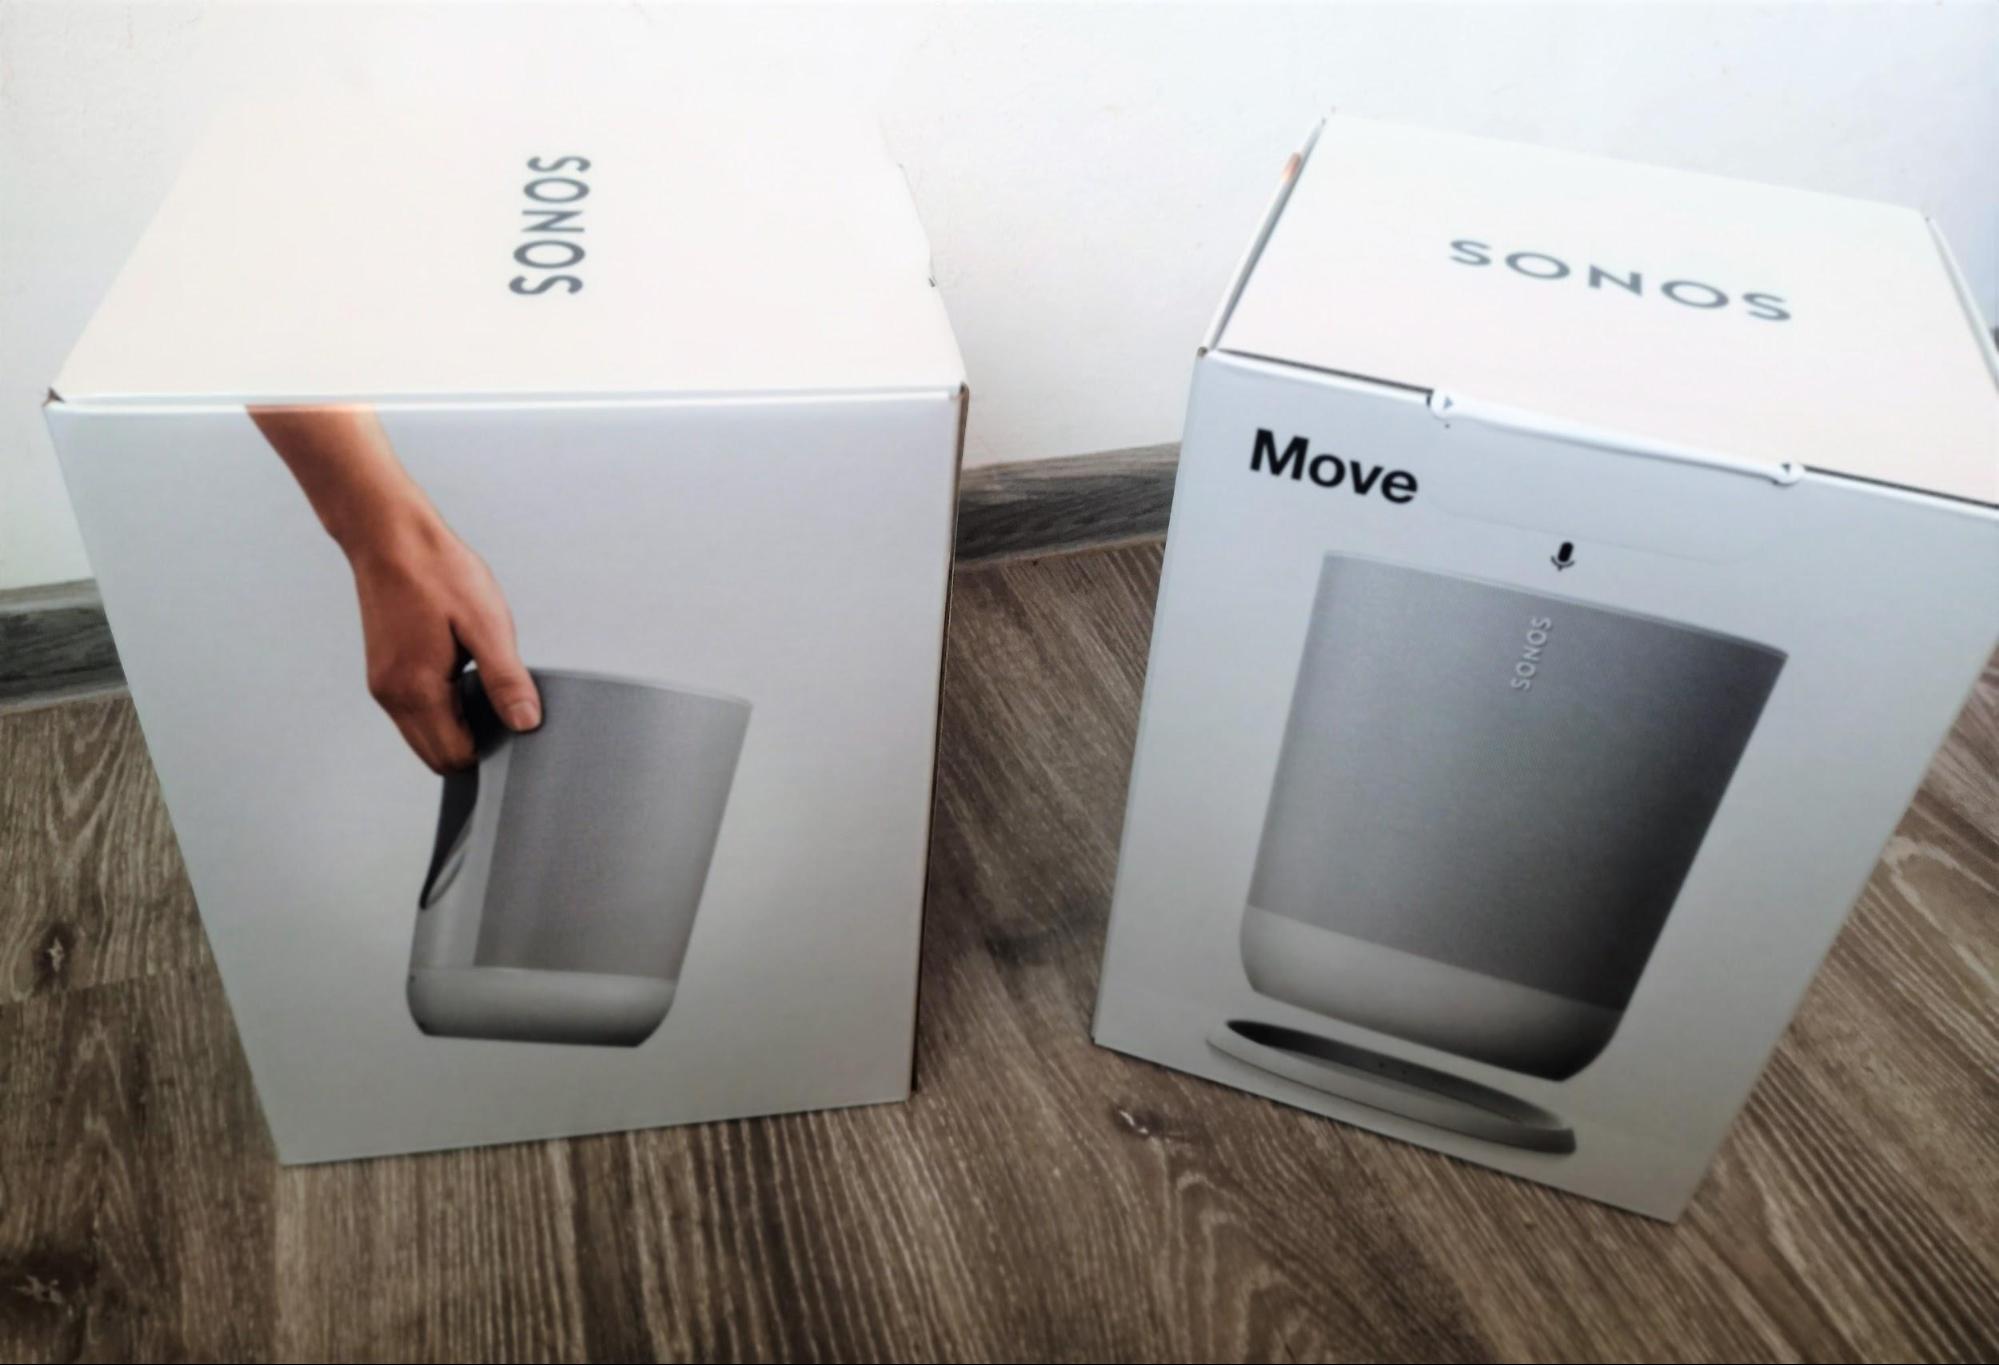 What the boxes of Sonos Move speakers look like